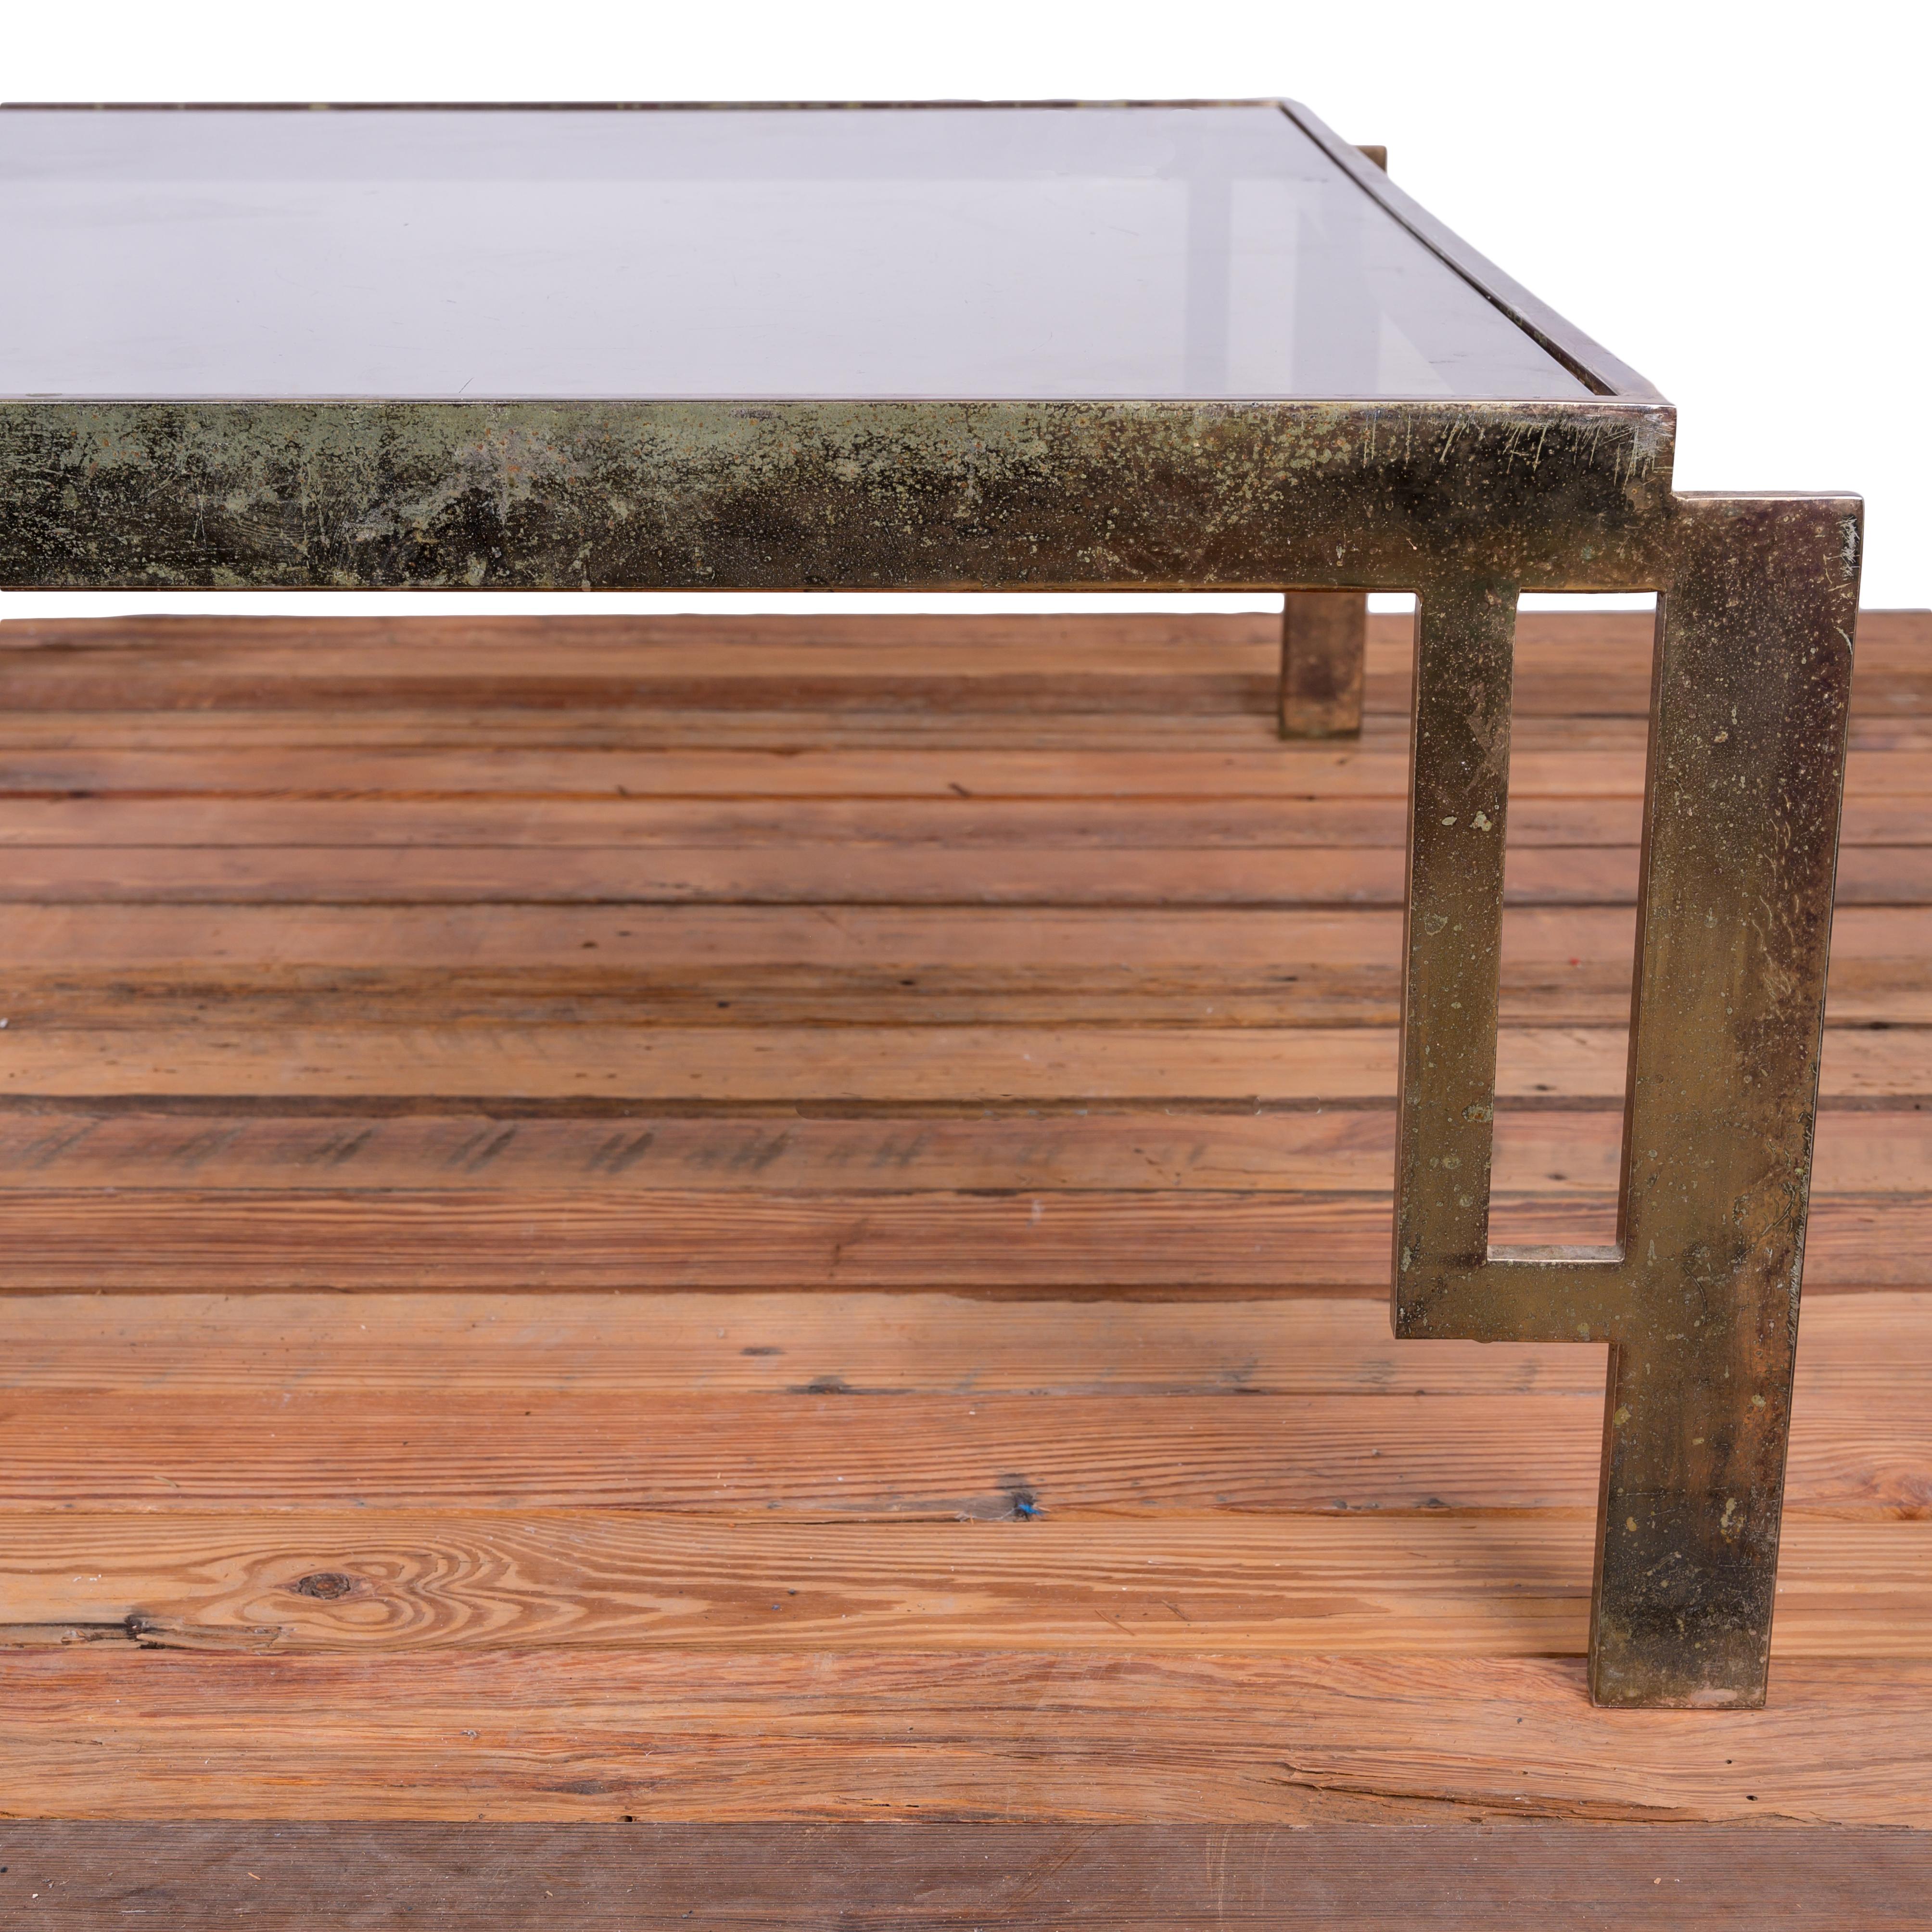 A brass and smoke glass cocktail table made in the 1970s.  It takes years of hard partying to get a perfect patina like this.  

40 inches wide by 40 inches deep by 15 inches tall

